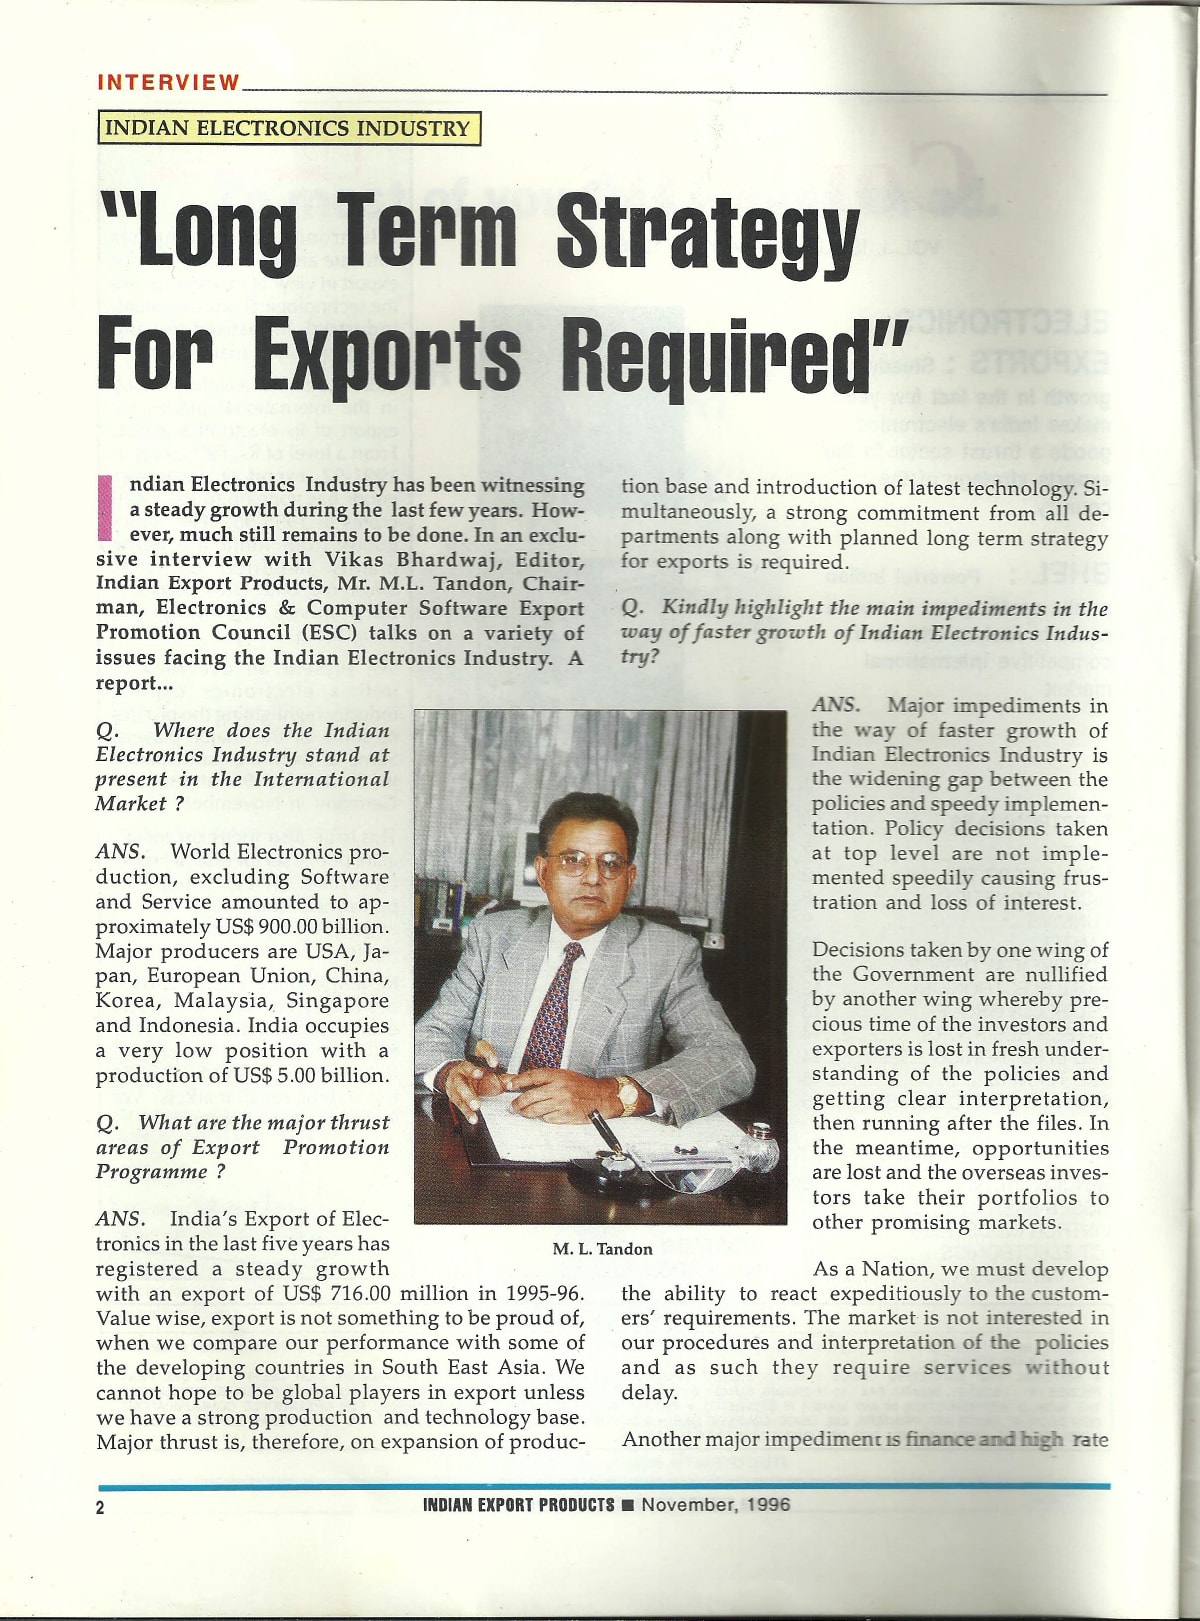 1996 November Indian Export Products Magazine Long Term Strategy For Exports Required feature Manohar Lal Tandon 2